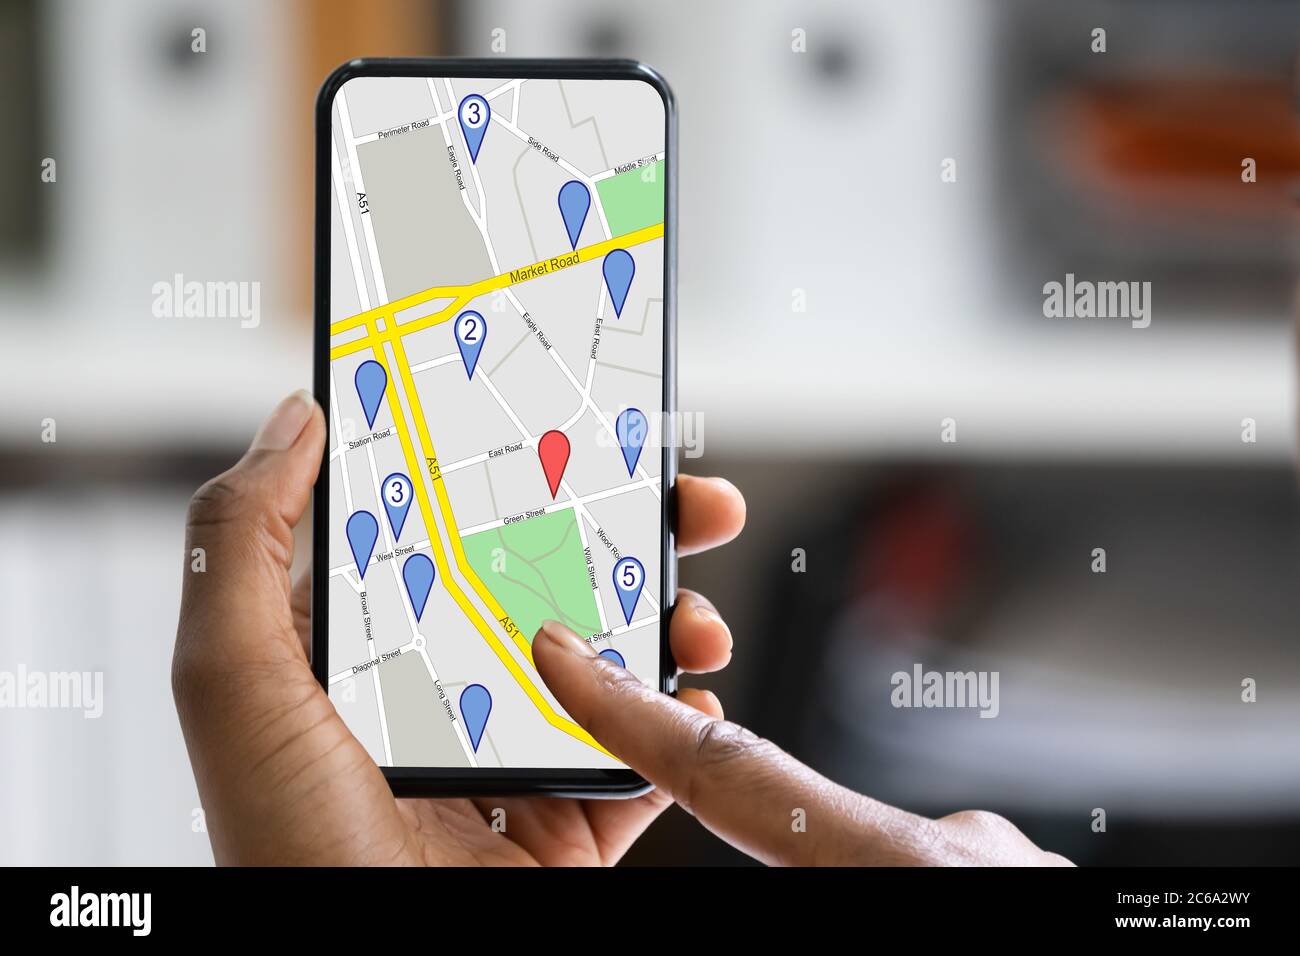 Gps Location Map Search On Mobile Phone 2C6A2WY 